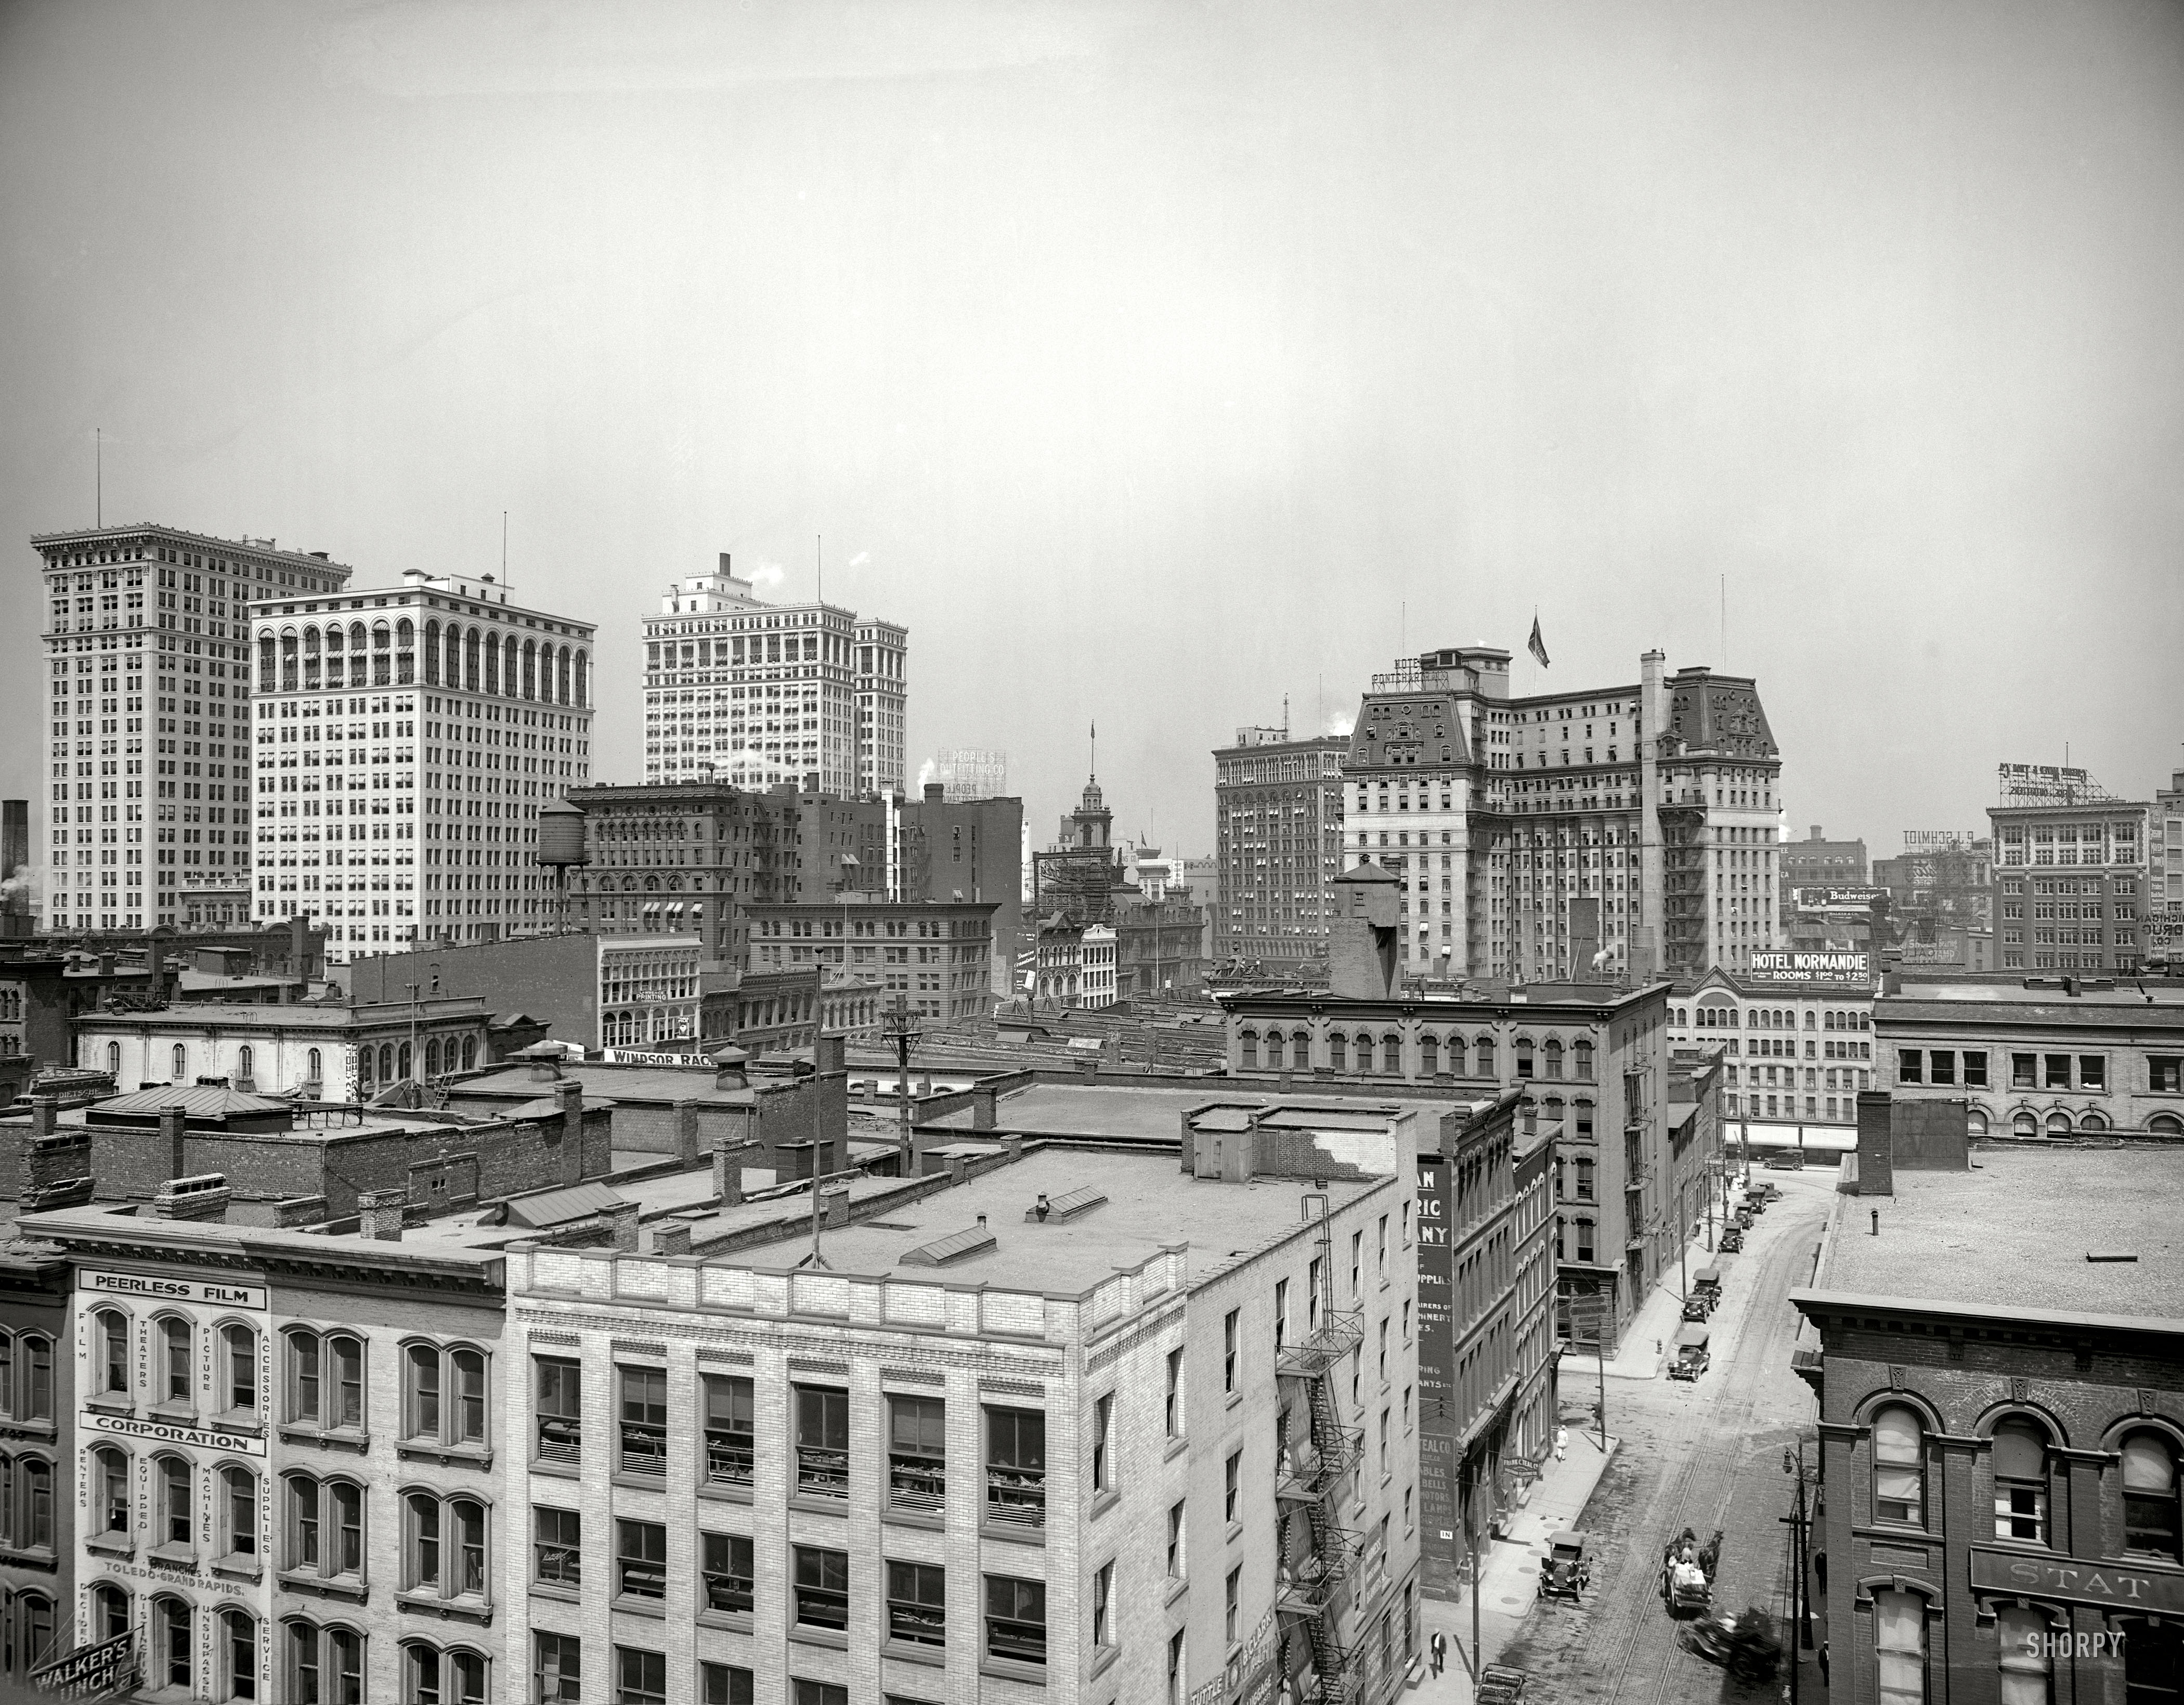 Detroit circa 1917. "Looking northwest from roof of interurban station." Landmarks here include the Hotel Pontchartrain, Ford Building and Dime Savings Bank. 8x10 inch glass negative, Detroit Publishing Co. View full size.